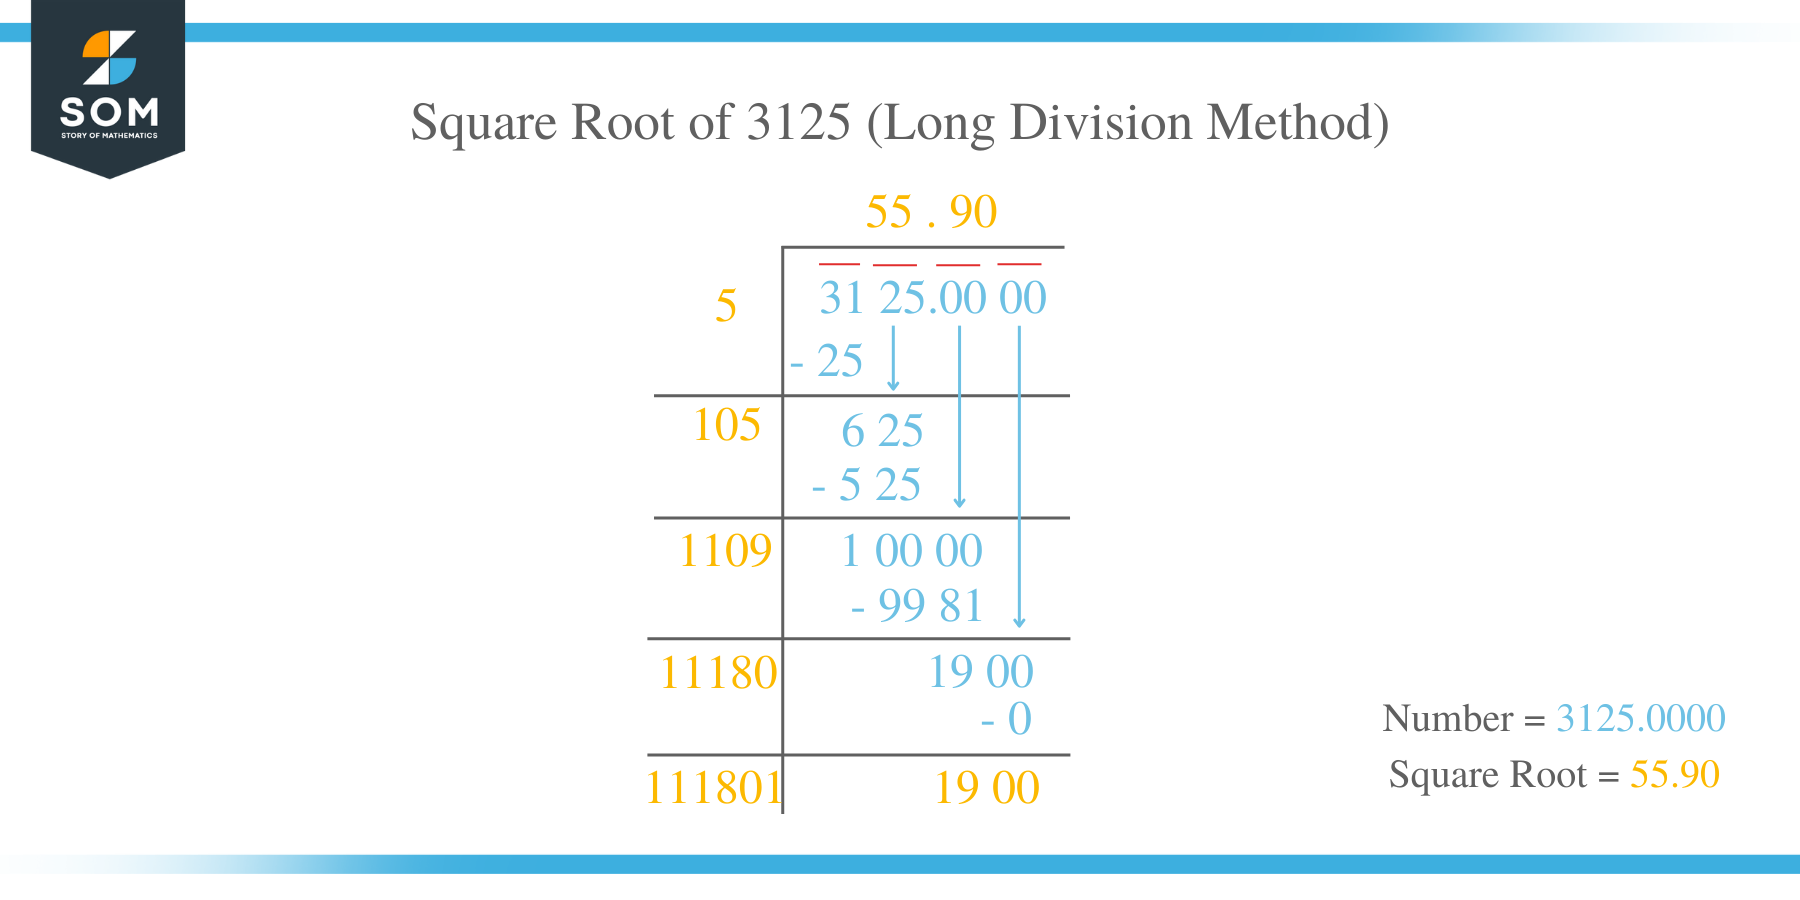 Square Root of 3125 by Long Division Method